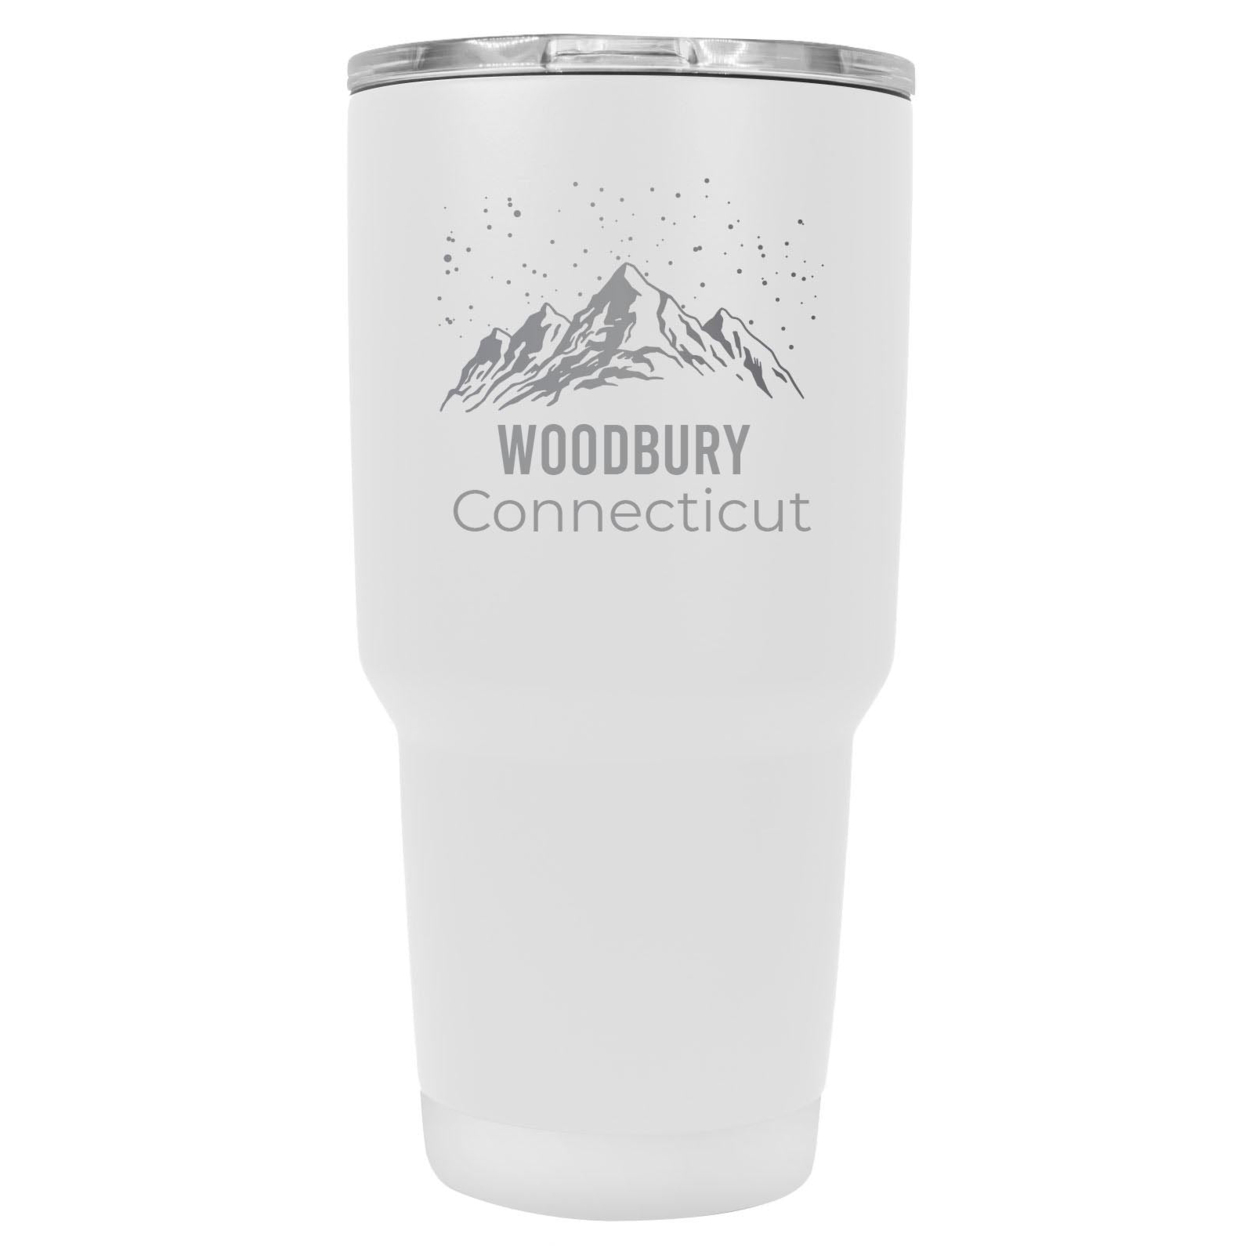 Woodbury Connecticut Ski Snowboard Winter Souvenir Laser Engraved 24 Oz Insulated Stainless Steel Tumbler - Red